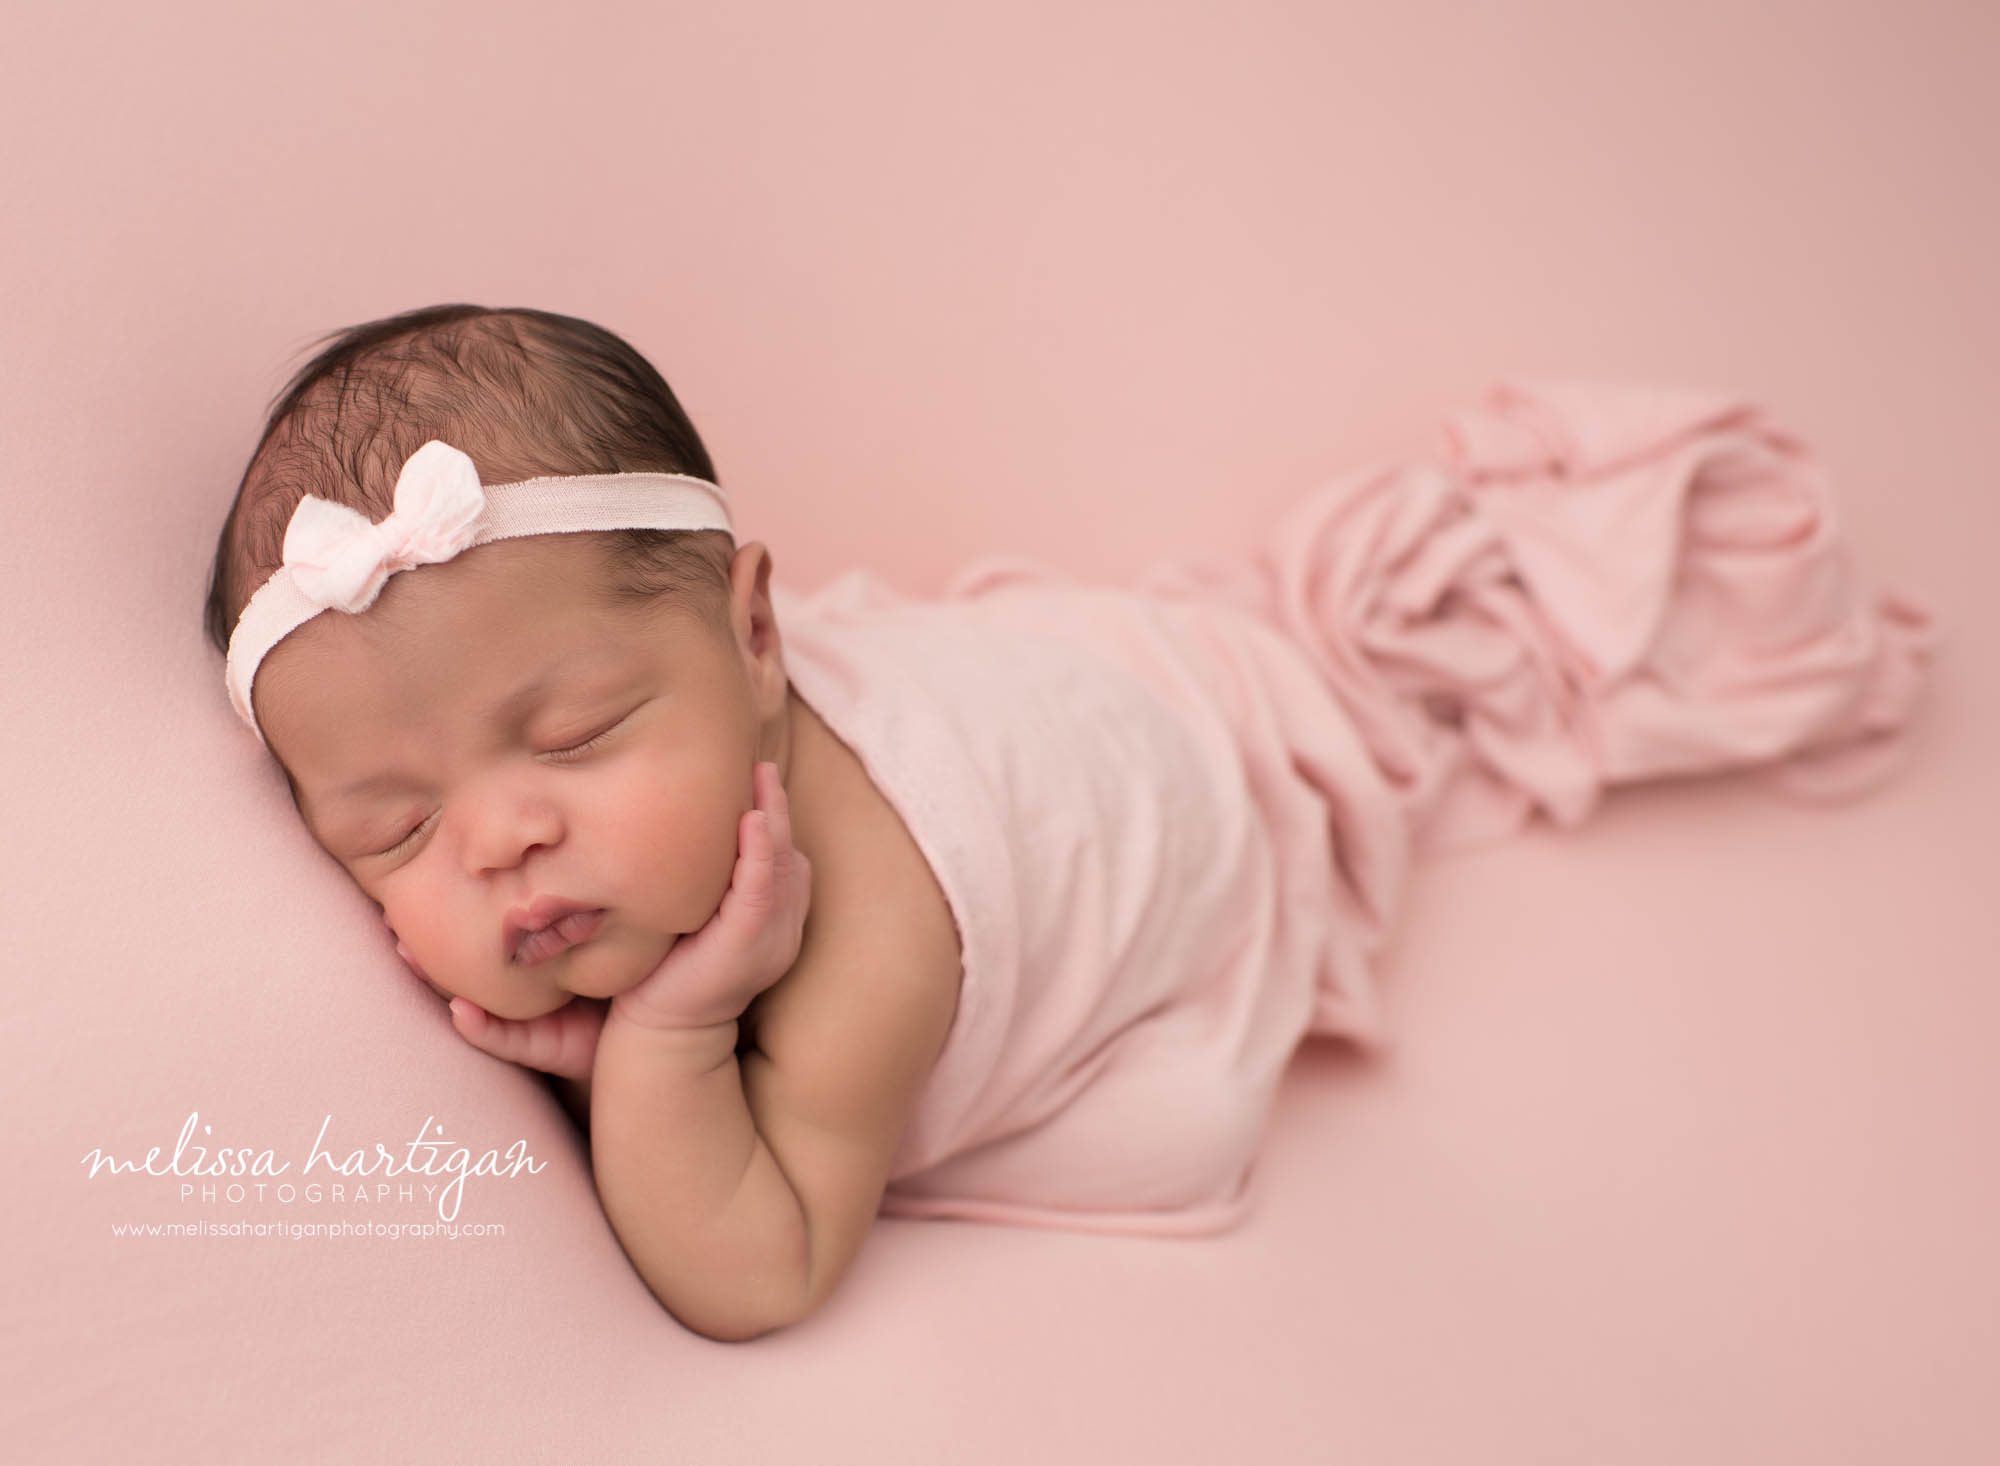 newborn baby girl posed on pink backdrop with pink wrap draped over